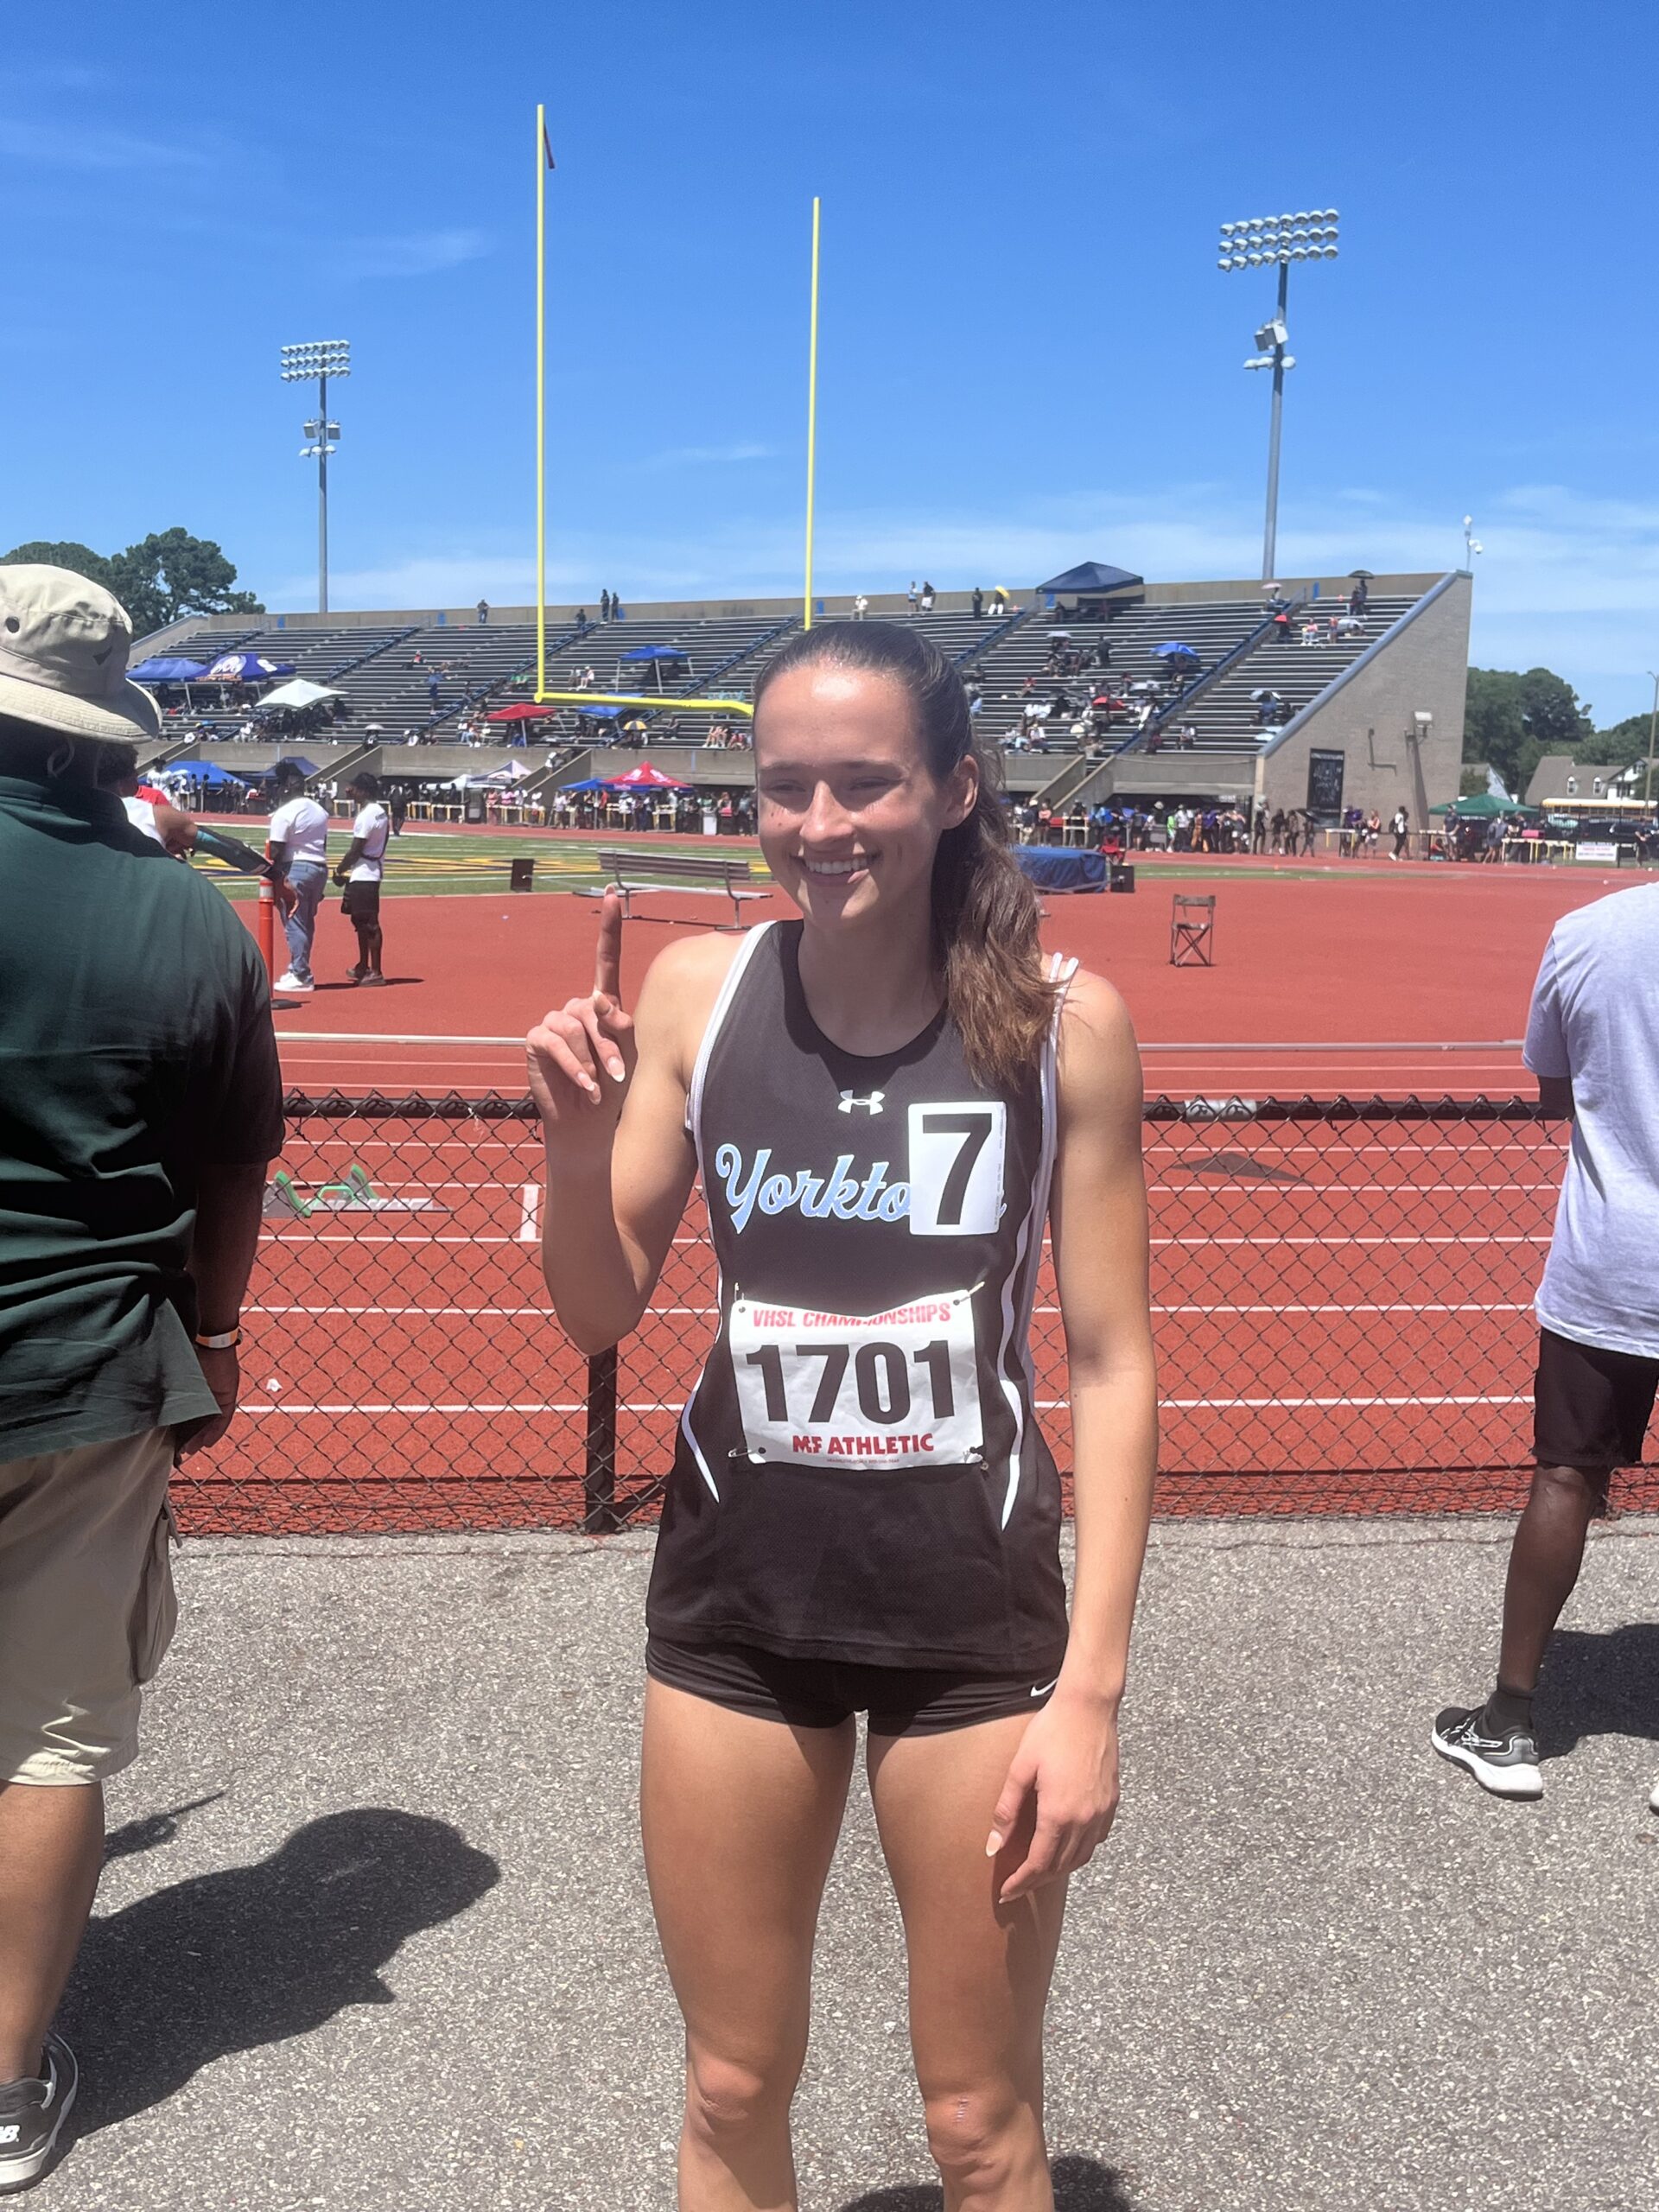 Marin places 5th in the 400 meter dash at State meet